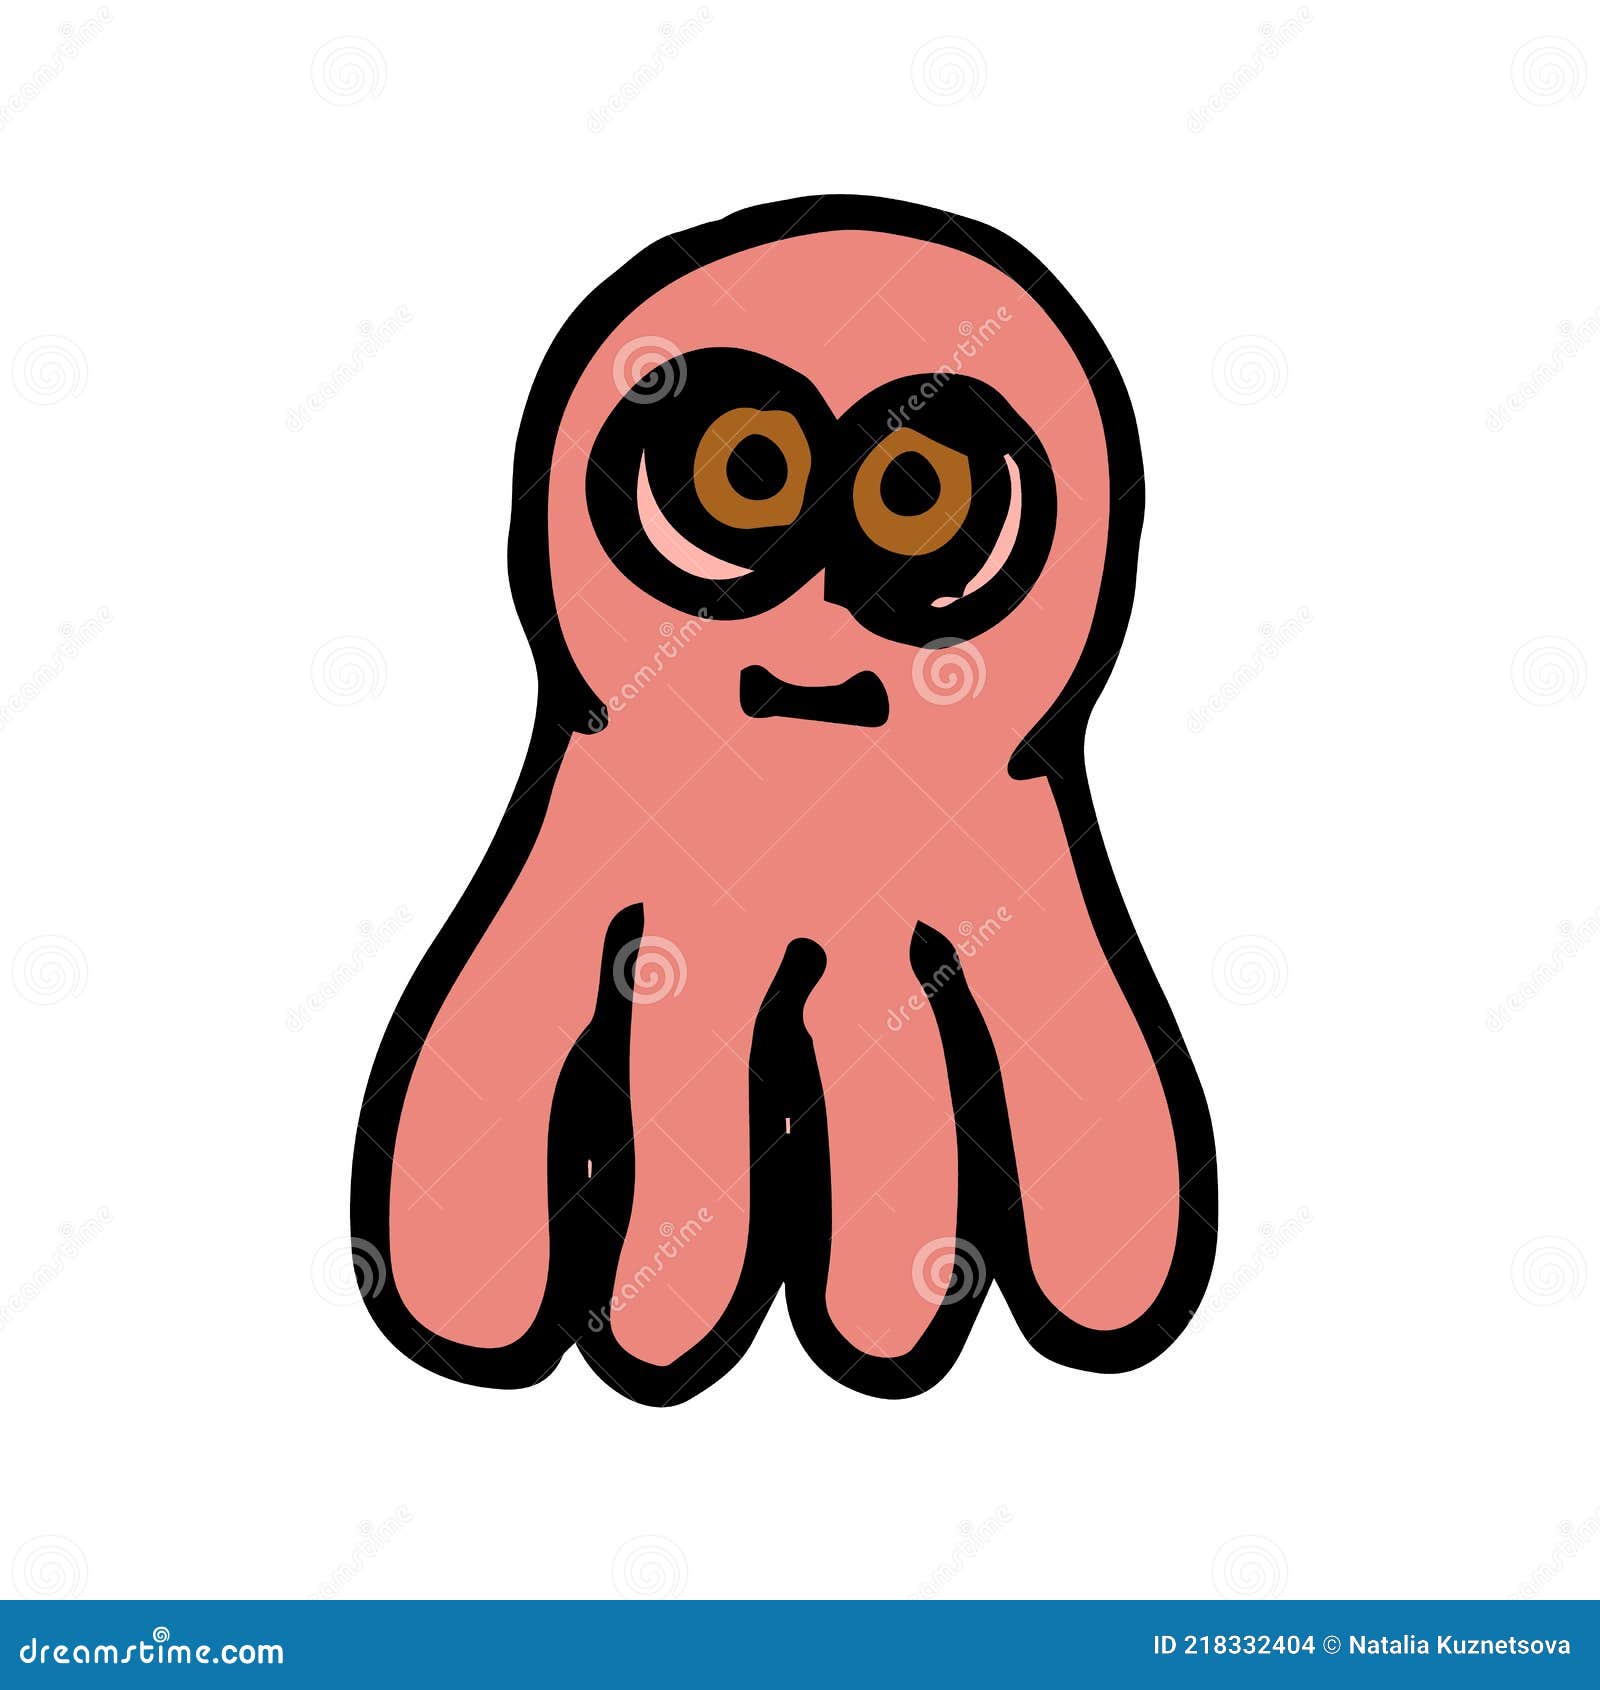 Octopus. Illustration. Cartoon Sketch Style. Hand Outline Drawing Cheerful  Funny Underwater Animal Stock Vector - Illustration of octopus, graphic:  218332404